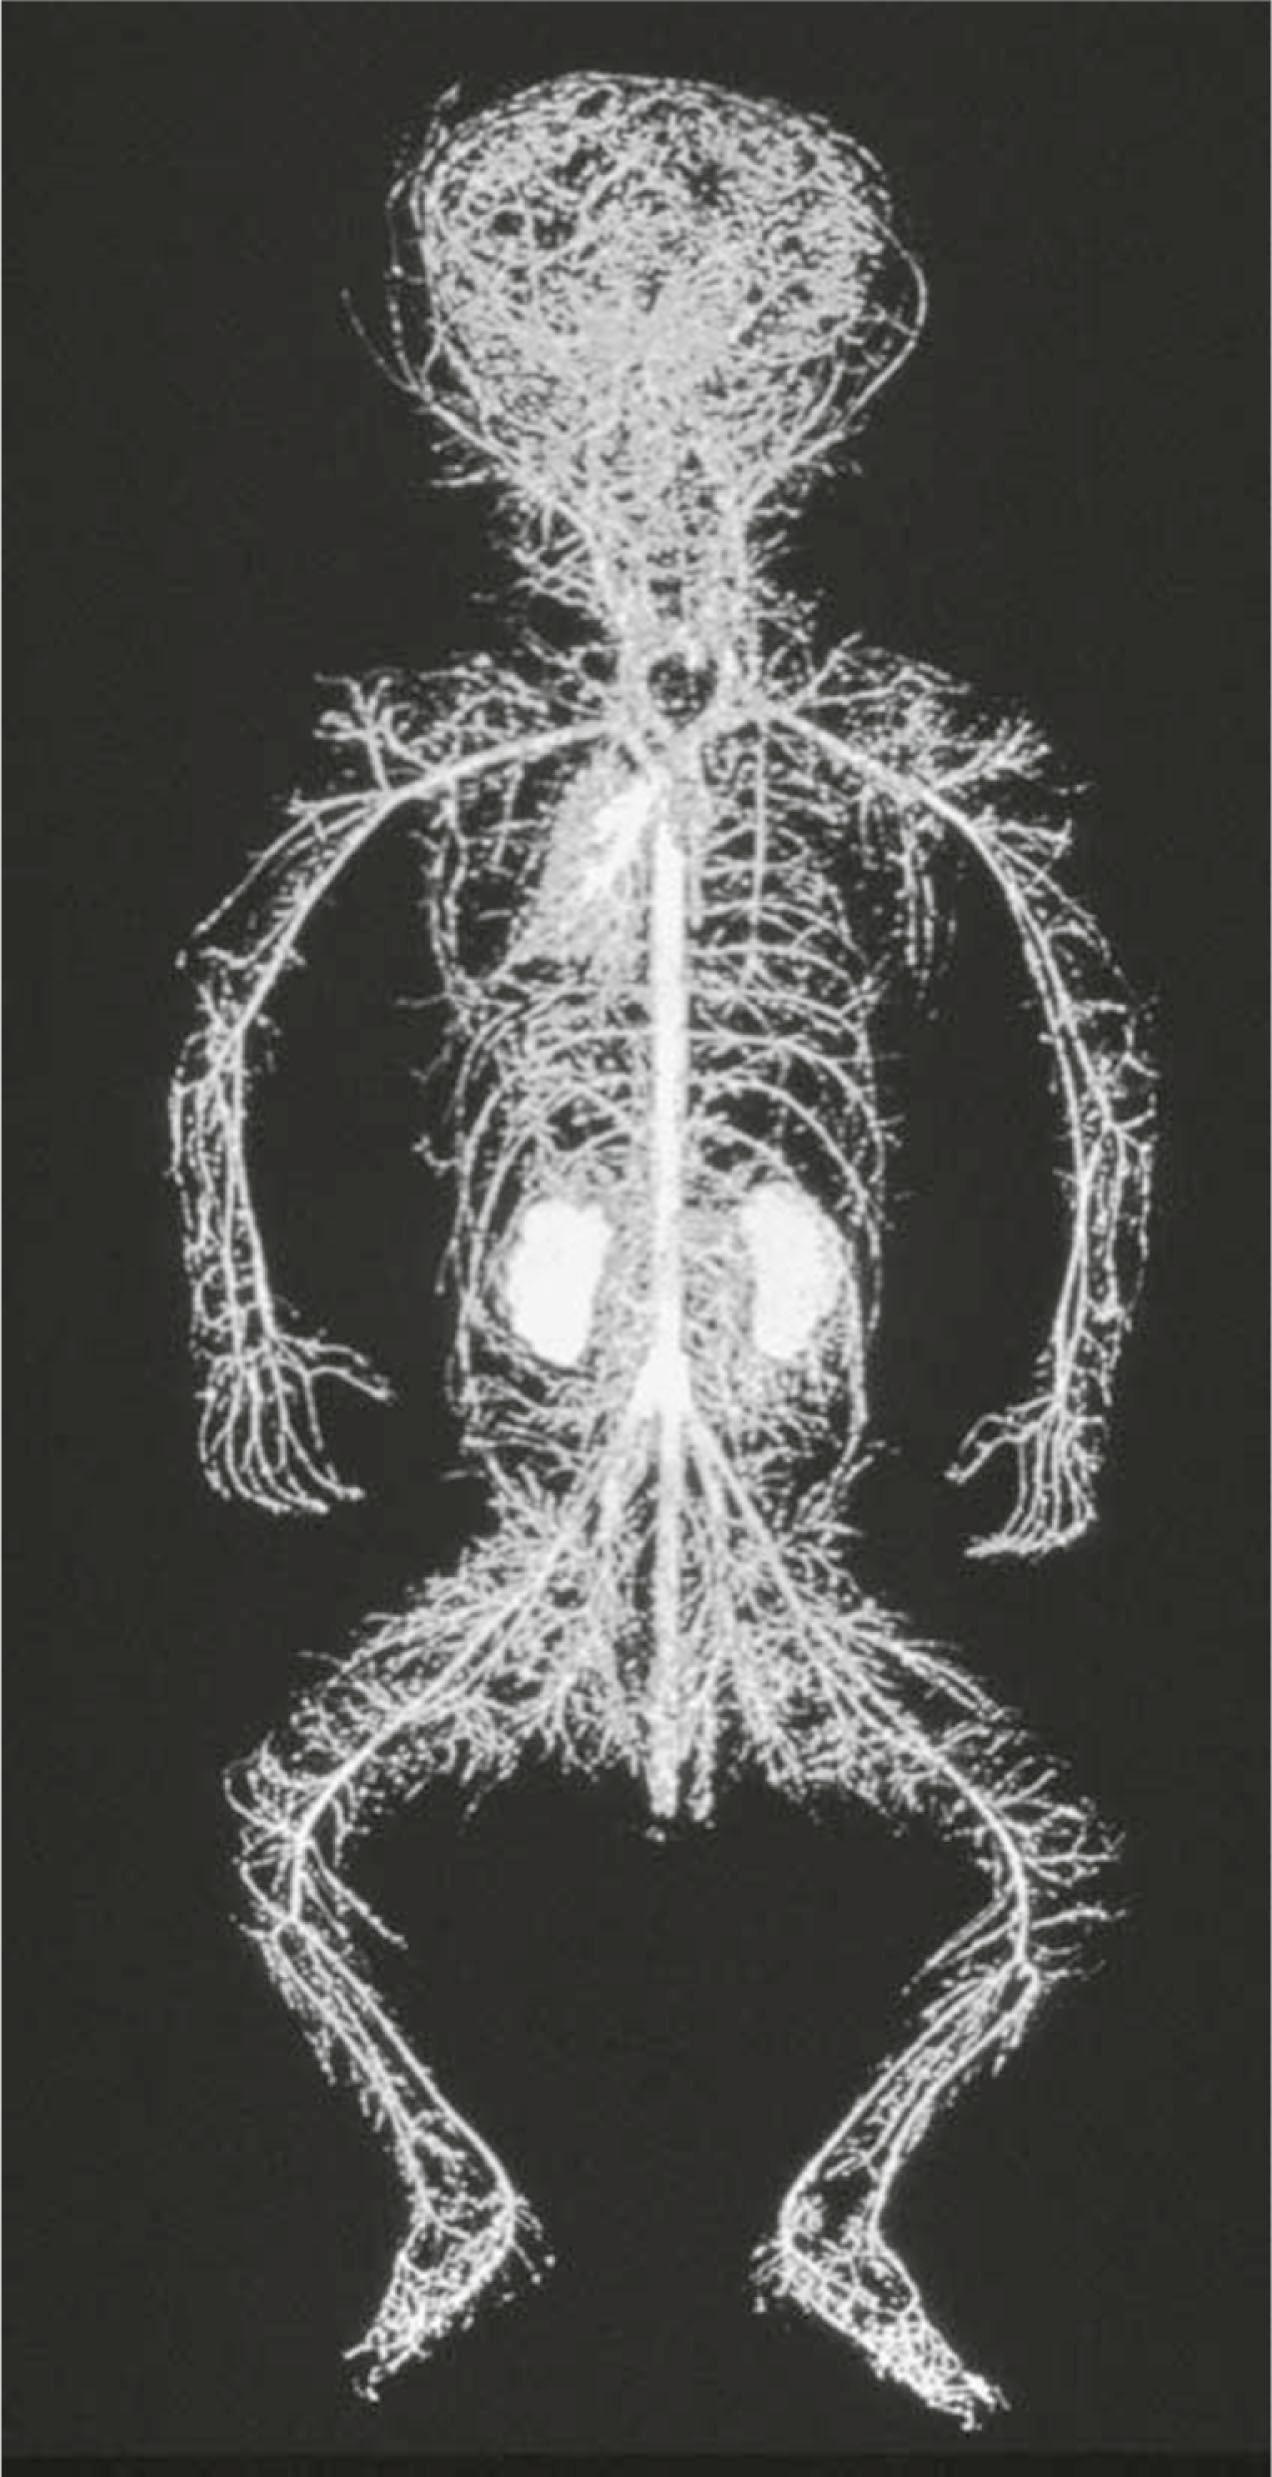 Figure 23.2, Tompsett's arterial skeleton of the body. This corrosion cast of the newborn body shows the arterial architecture of the body.